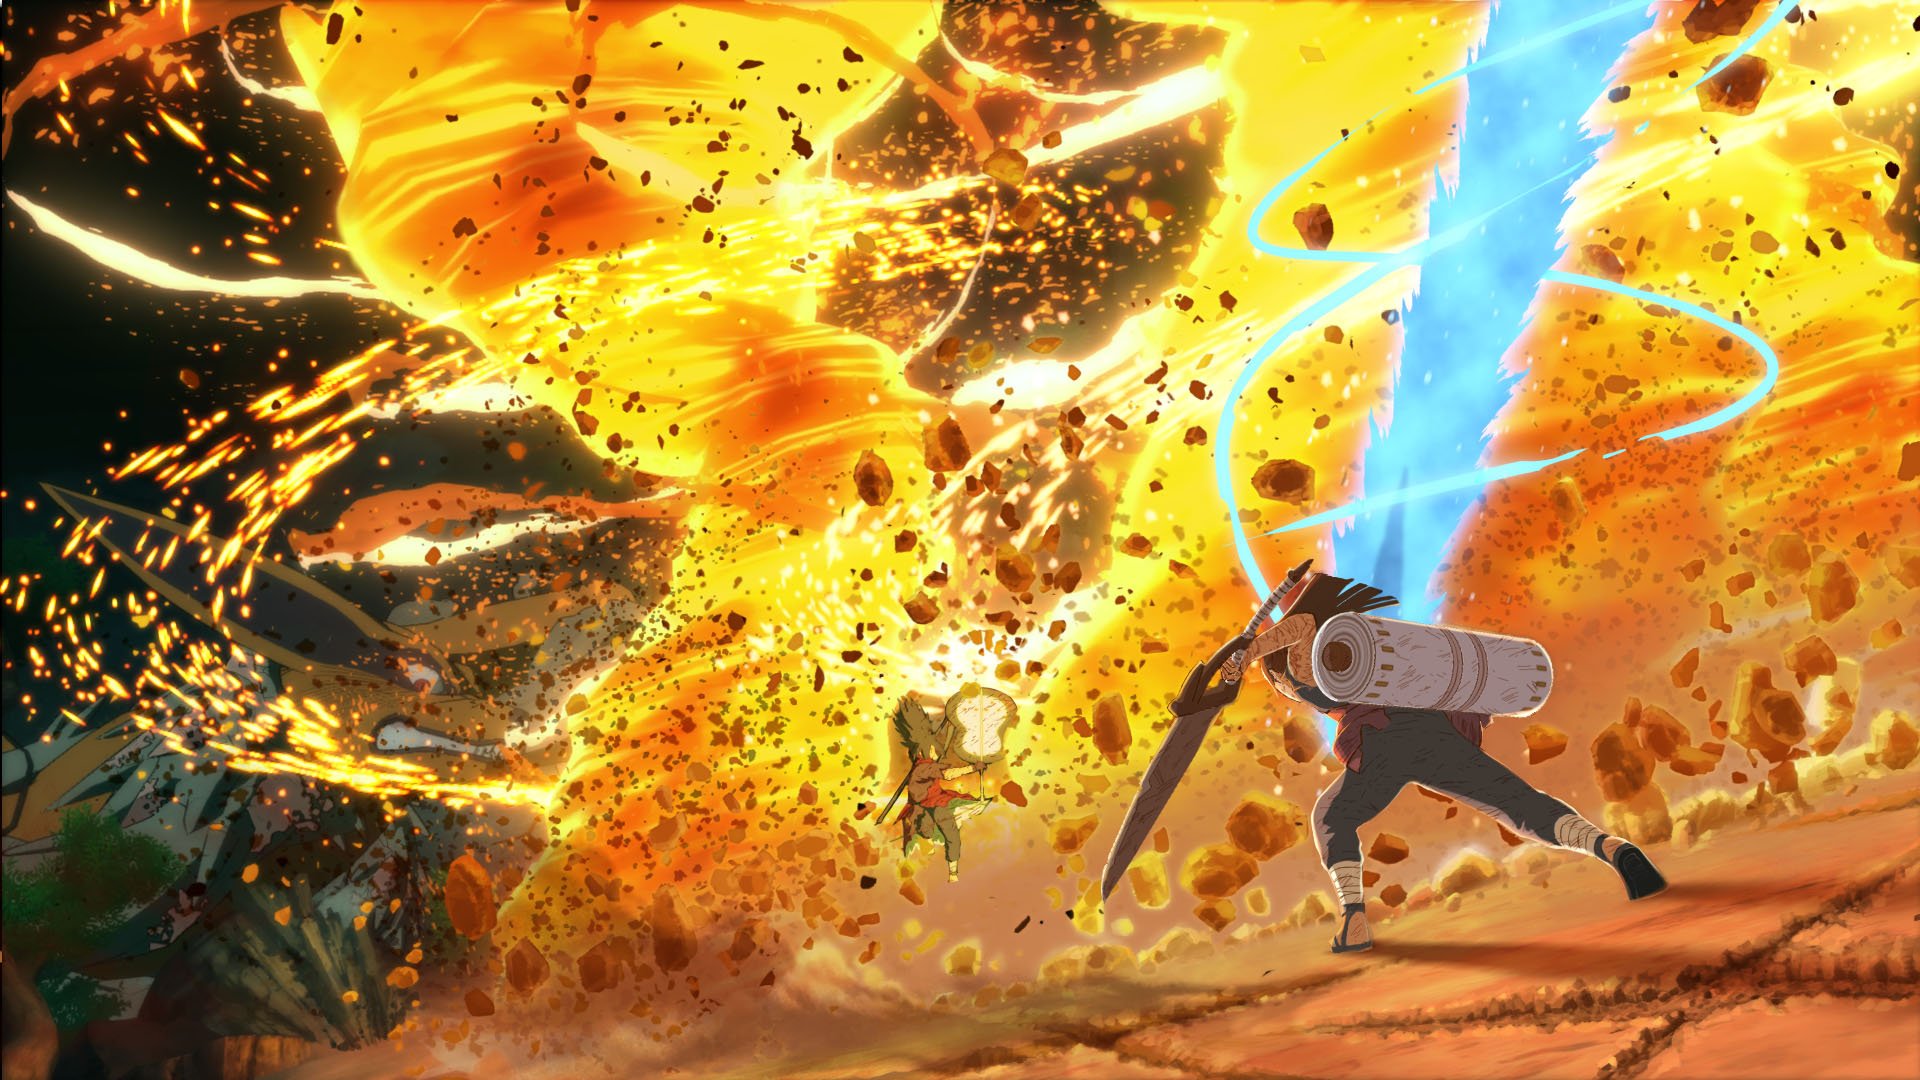 naruto, Shippuden, Ultimate, Ninja, Storm, Anime, Action, Fighting, 1nsuns,  Fantasy, Martial, Arts Wallpapers HD / Desktop and Mobile Backgrounds